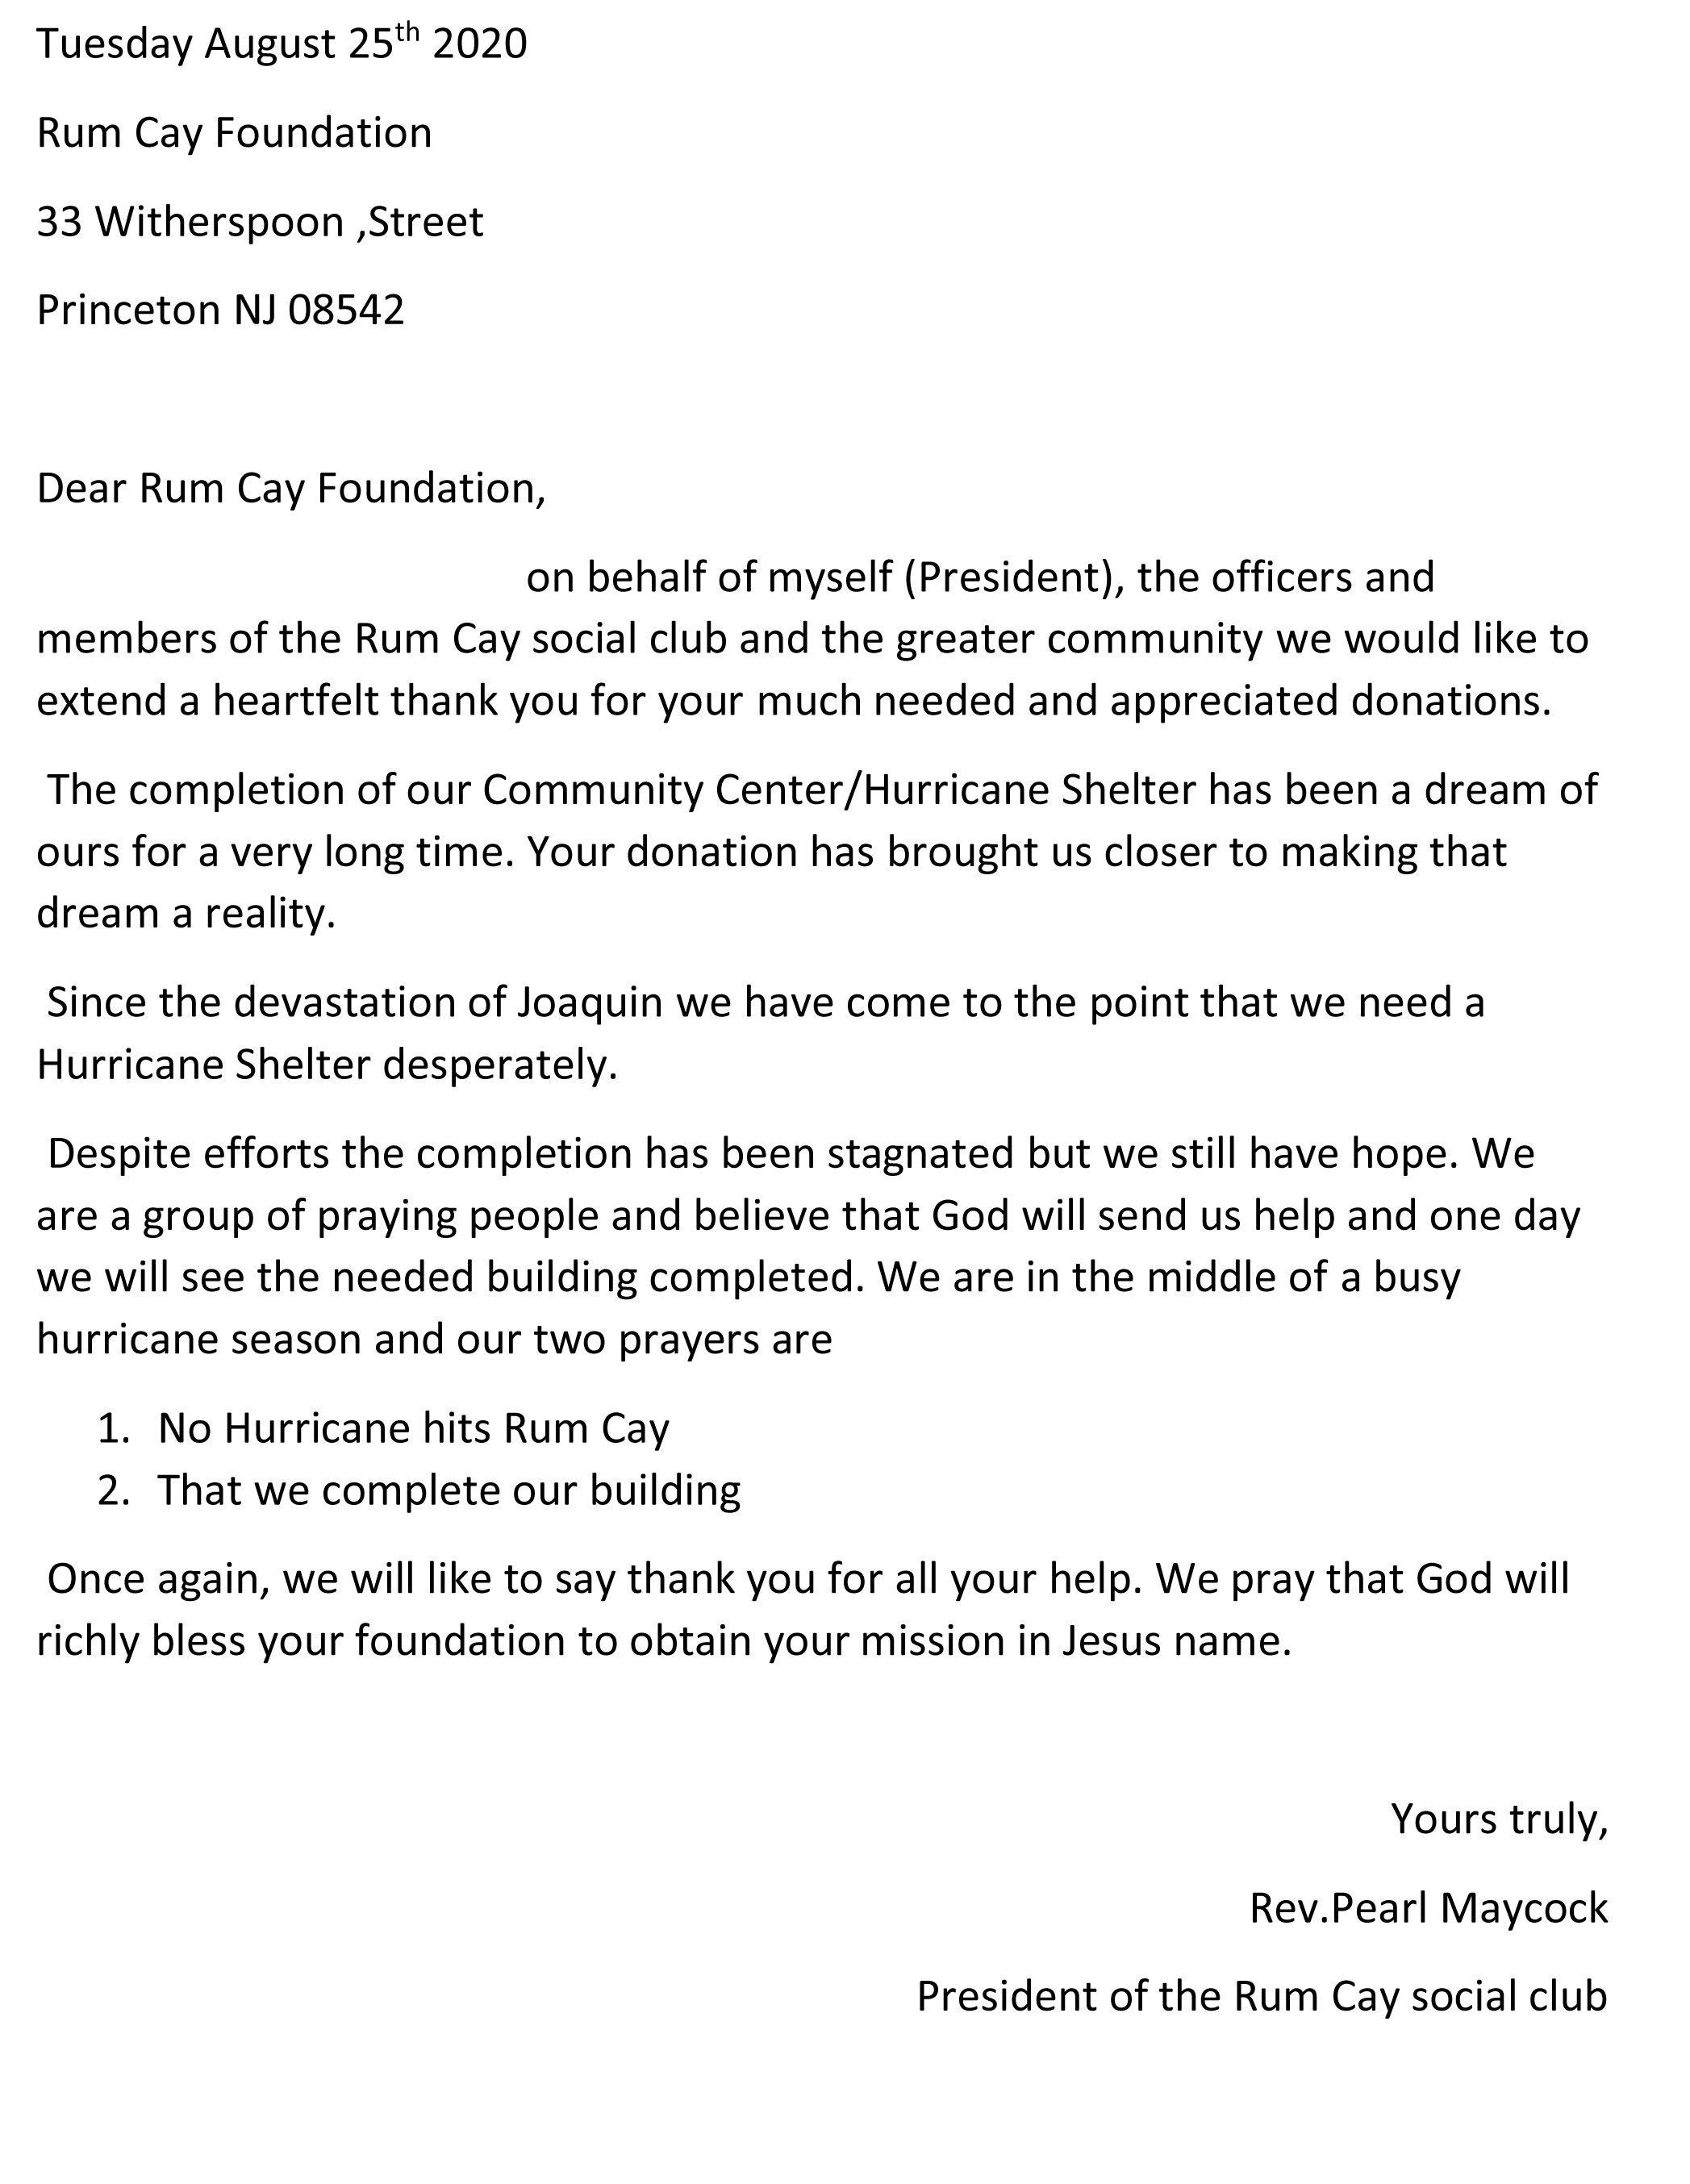 letter  to rum Cay foundation-1.jpg